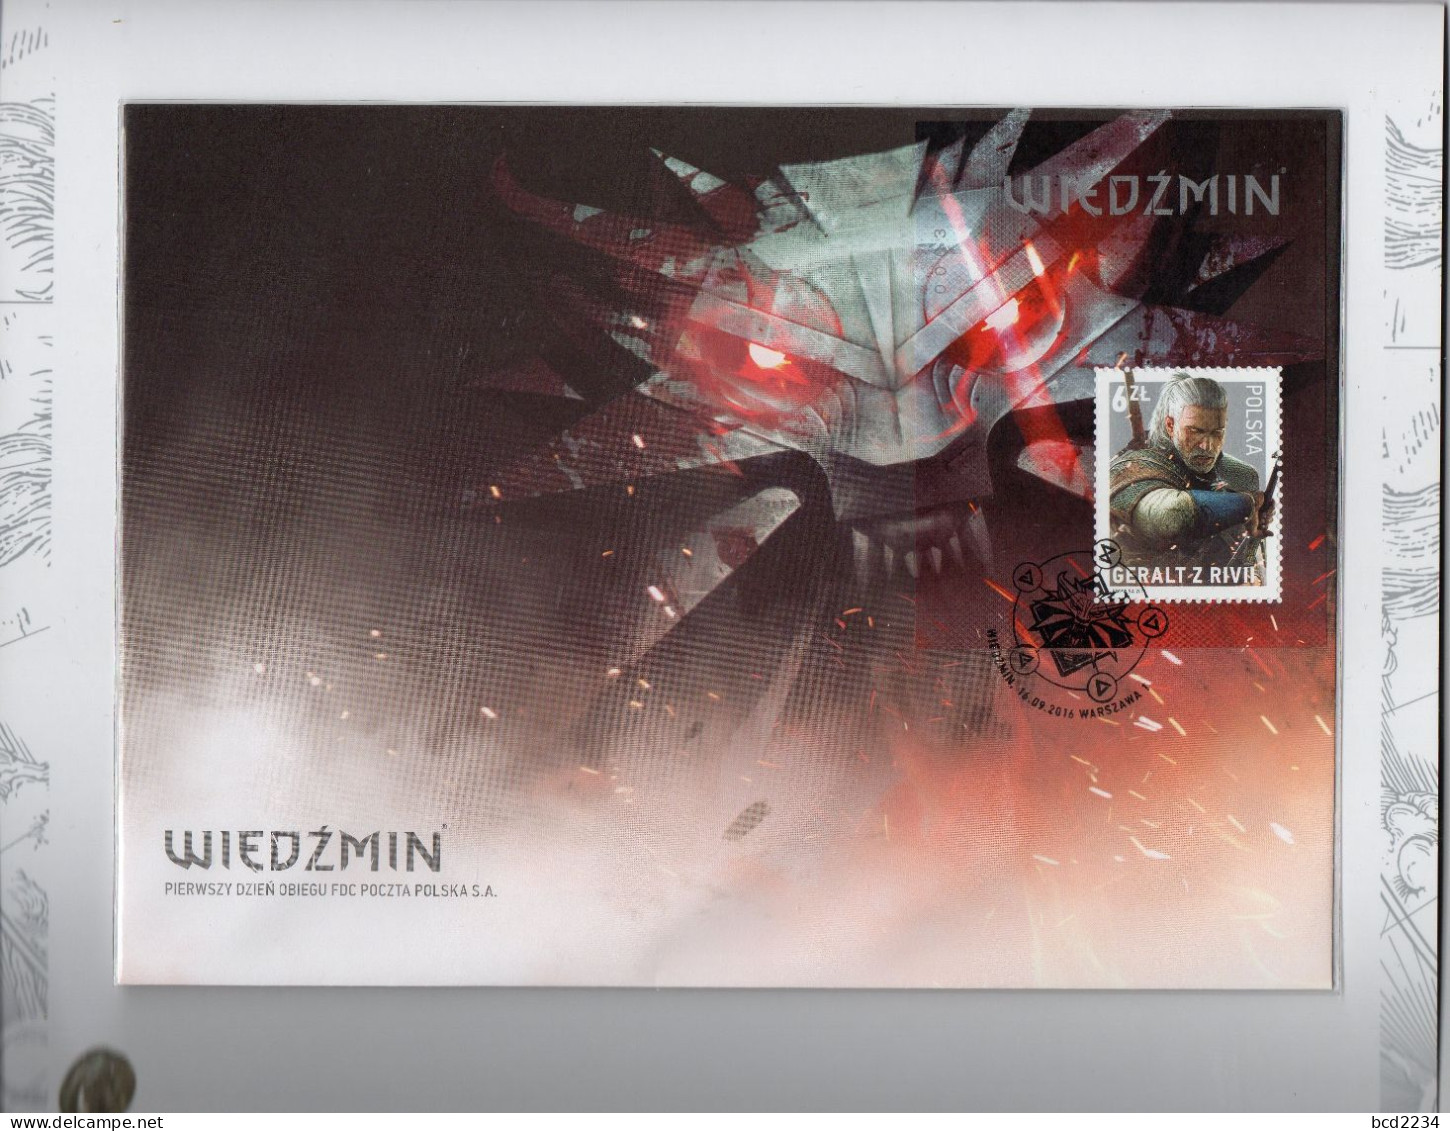 POLAND 2016 SPECIAL LIMITED EDITION PHILATELIC FOLDER: GERALT THE WITCHER FANTASY BOOKS WRITERS TV SERIES GAME MS - FDC